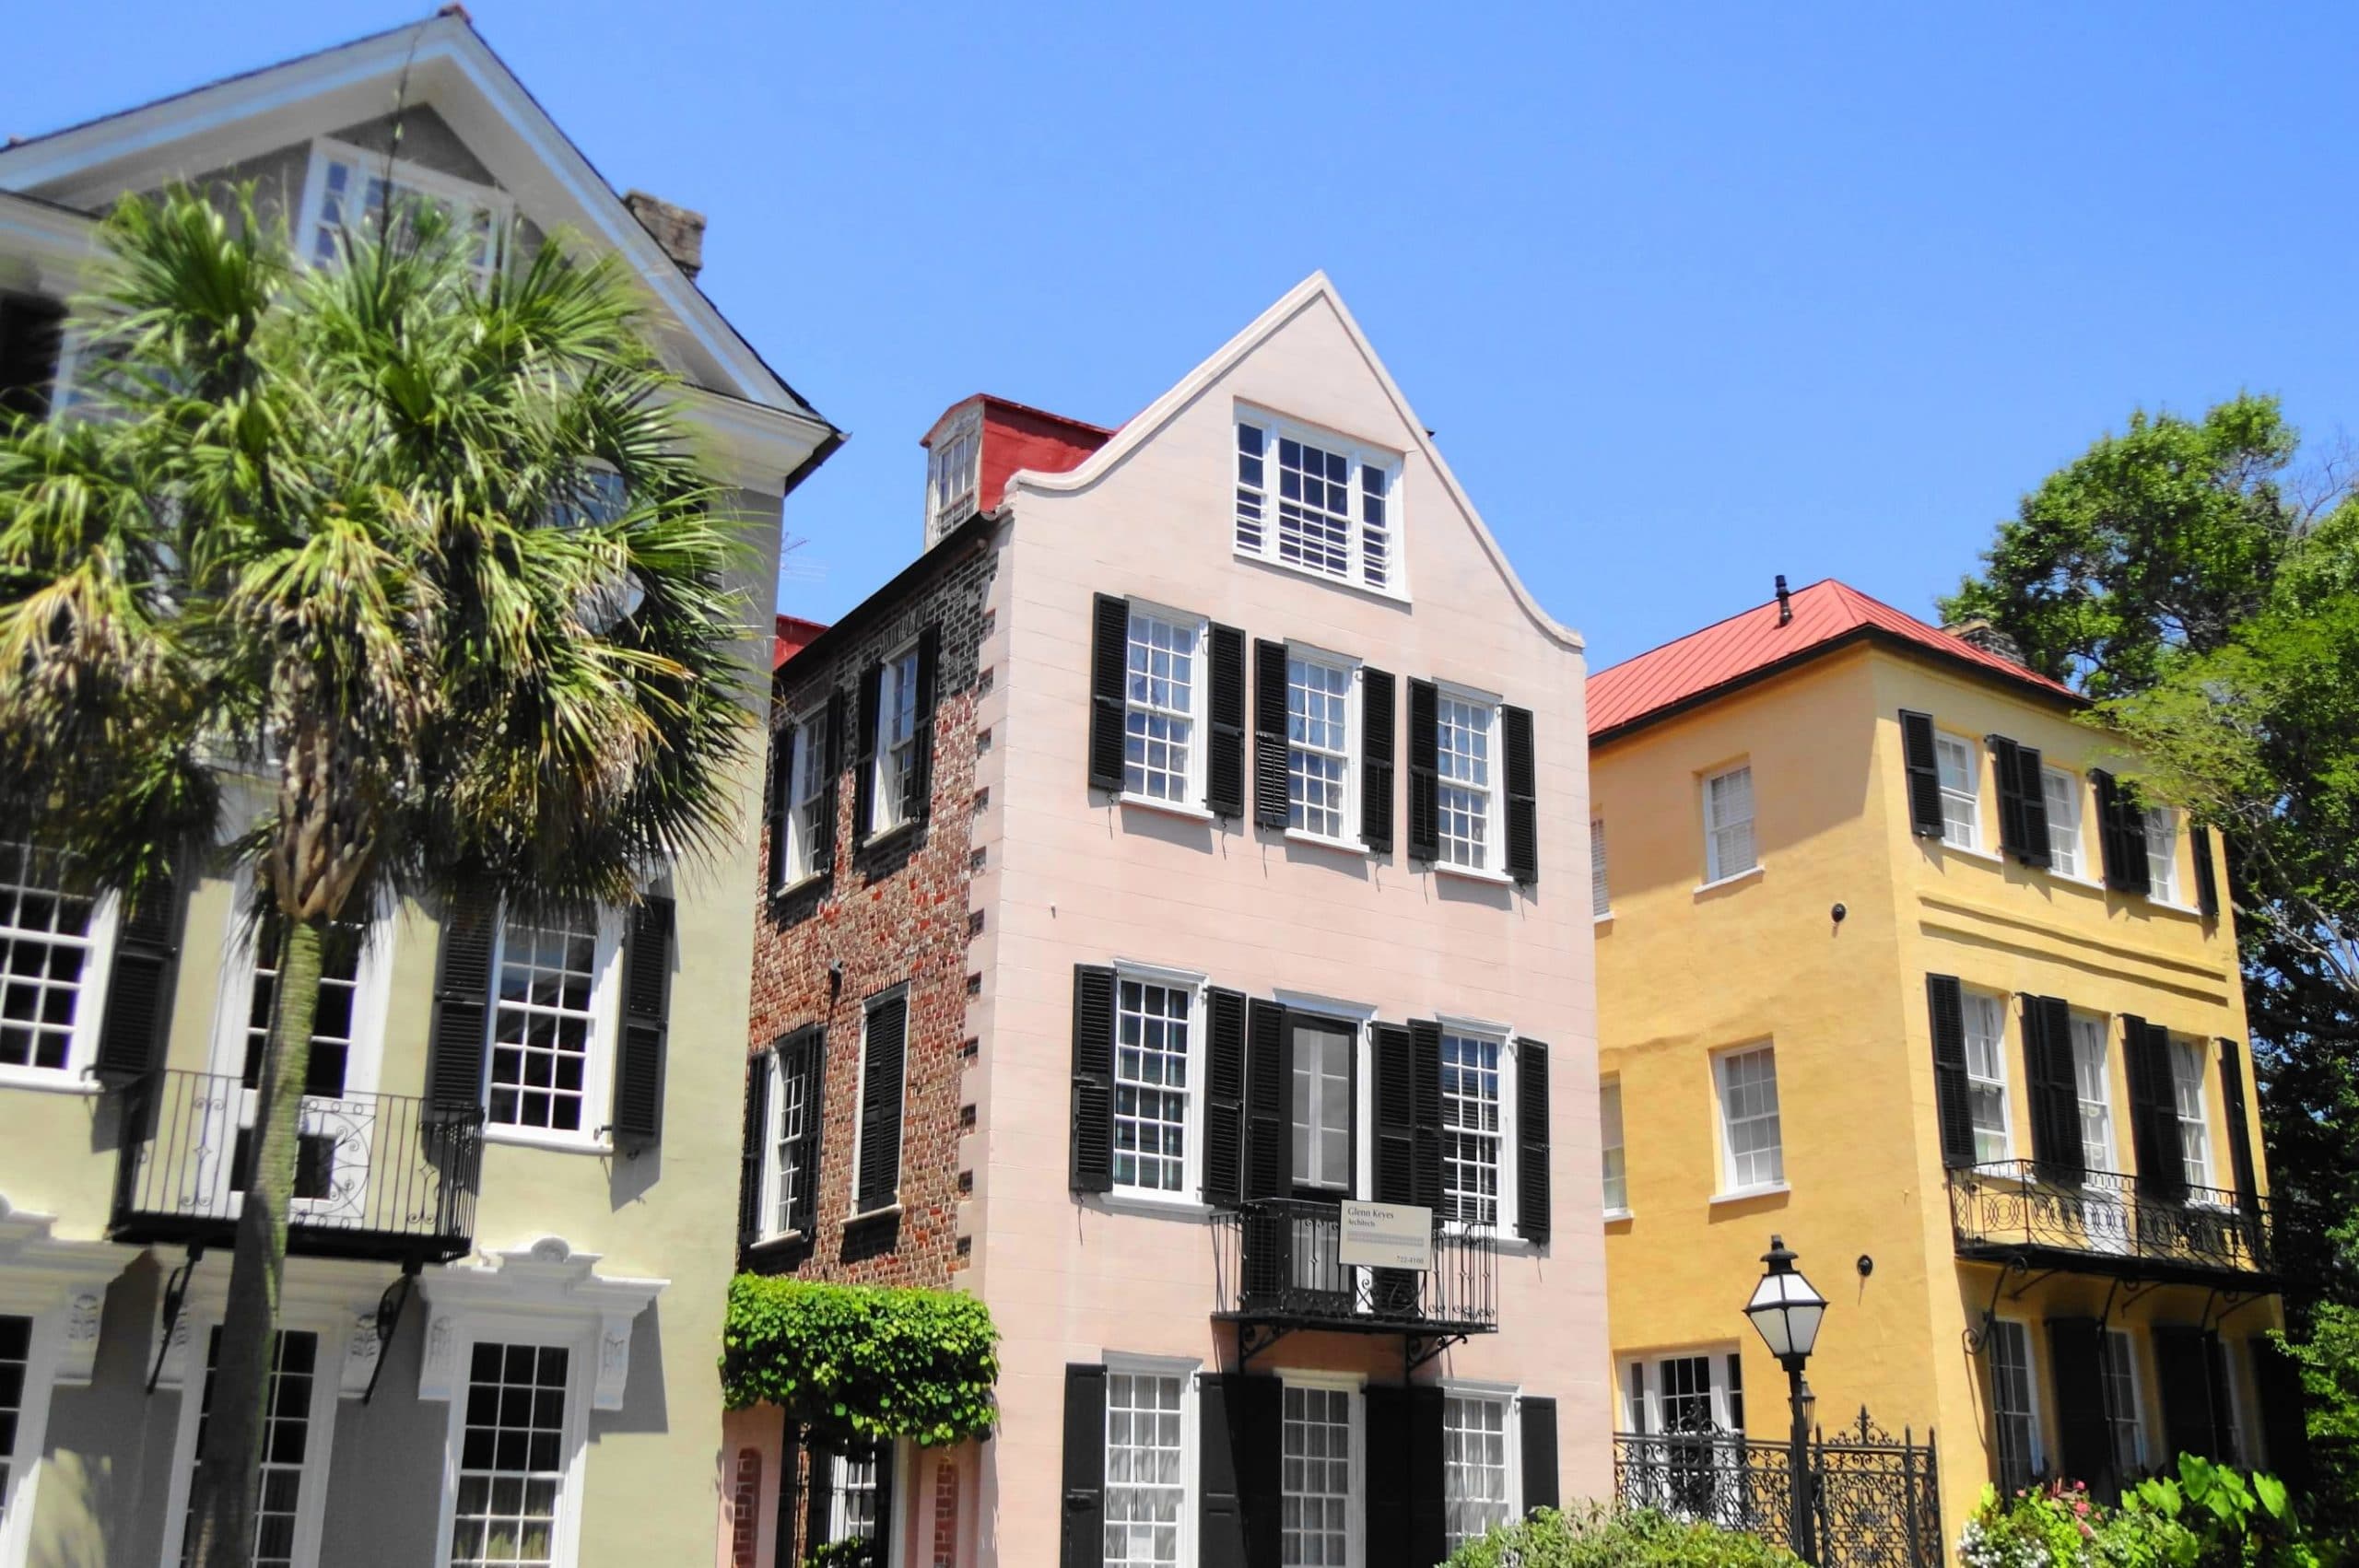 Discover the top attractions in Charleston, South Carolina. Explore what to do in Charleston if you have a whole week or just a few days!